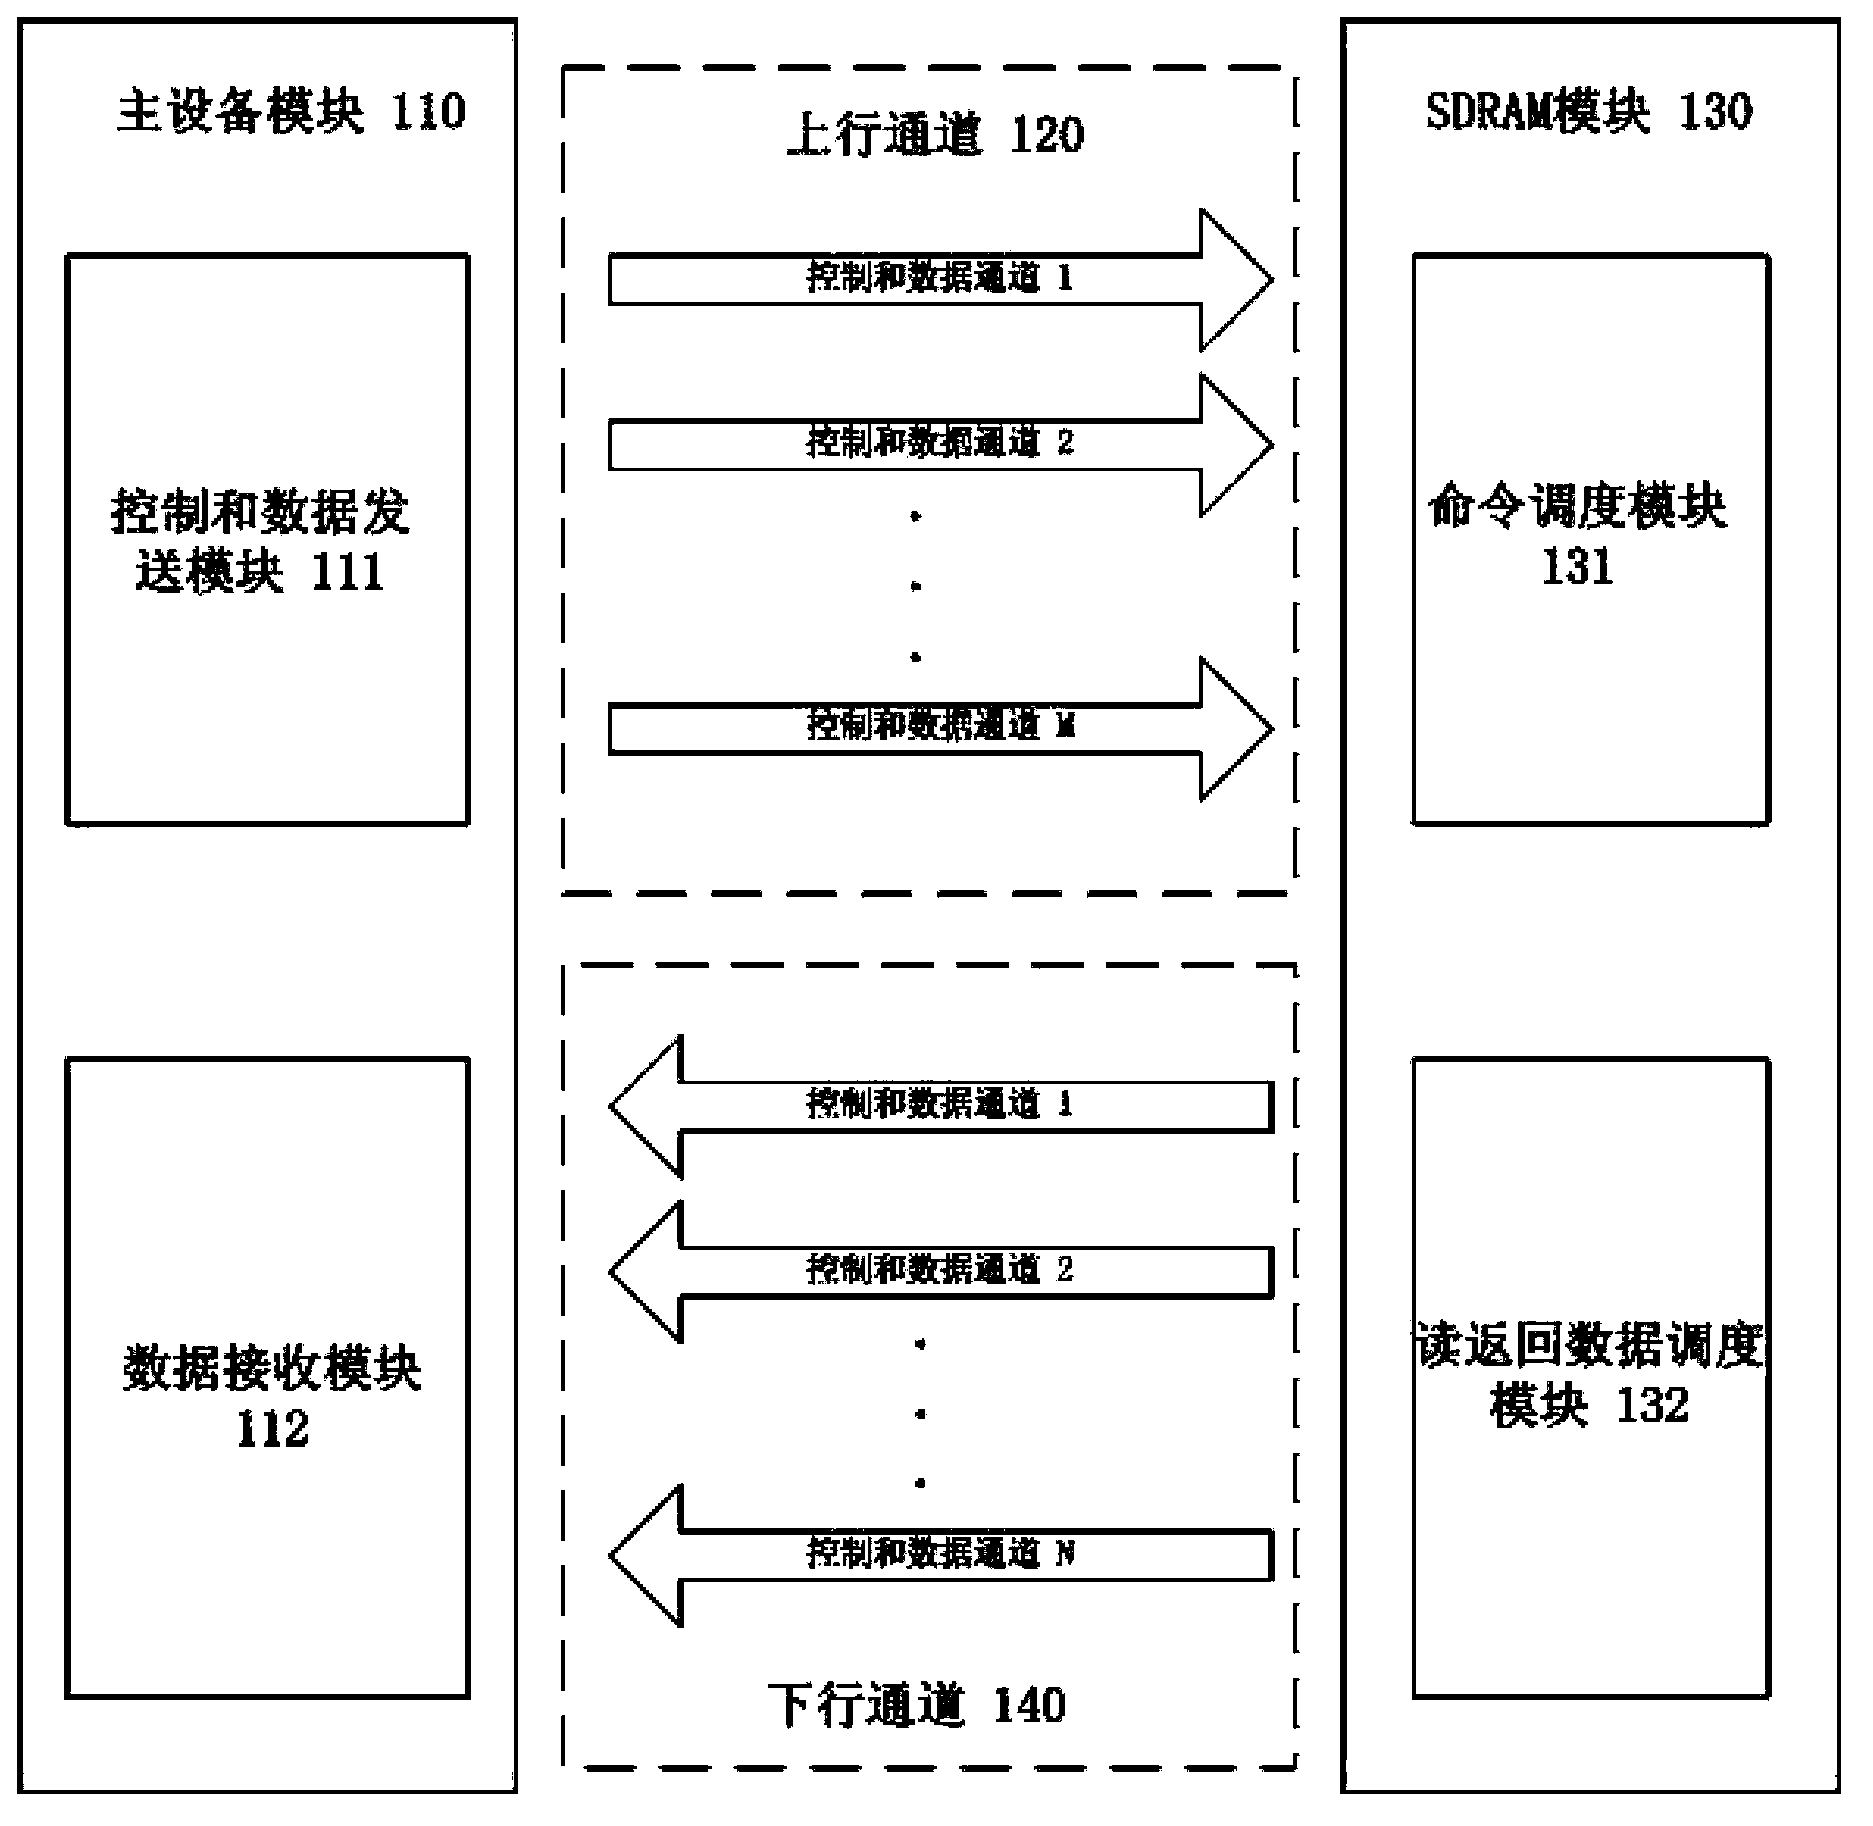 SDRAM controller and access method for SDRAM memory space